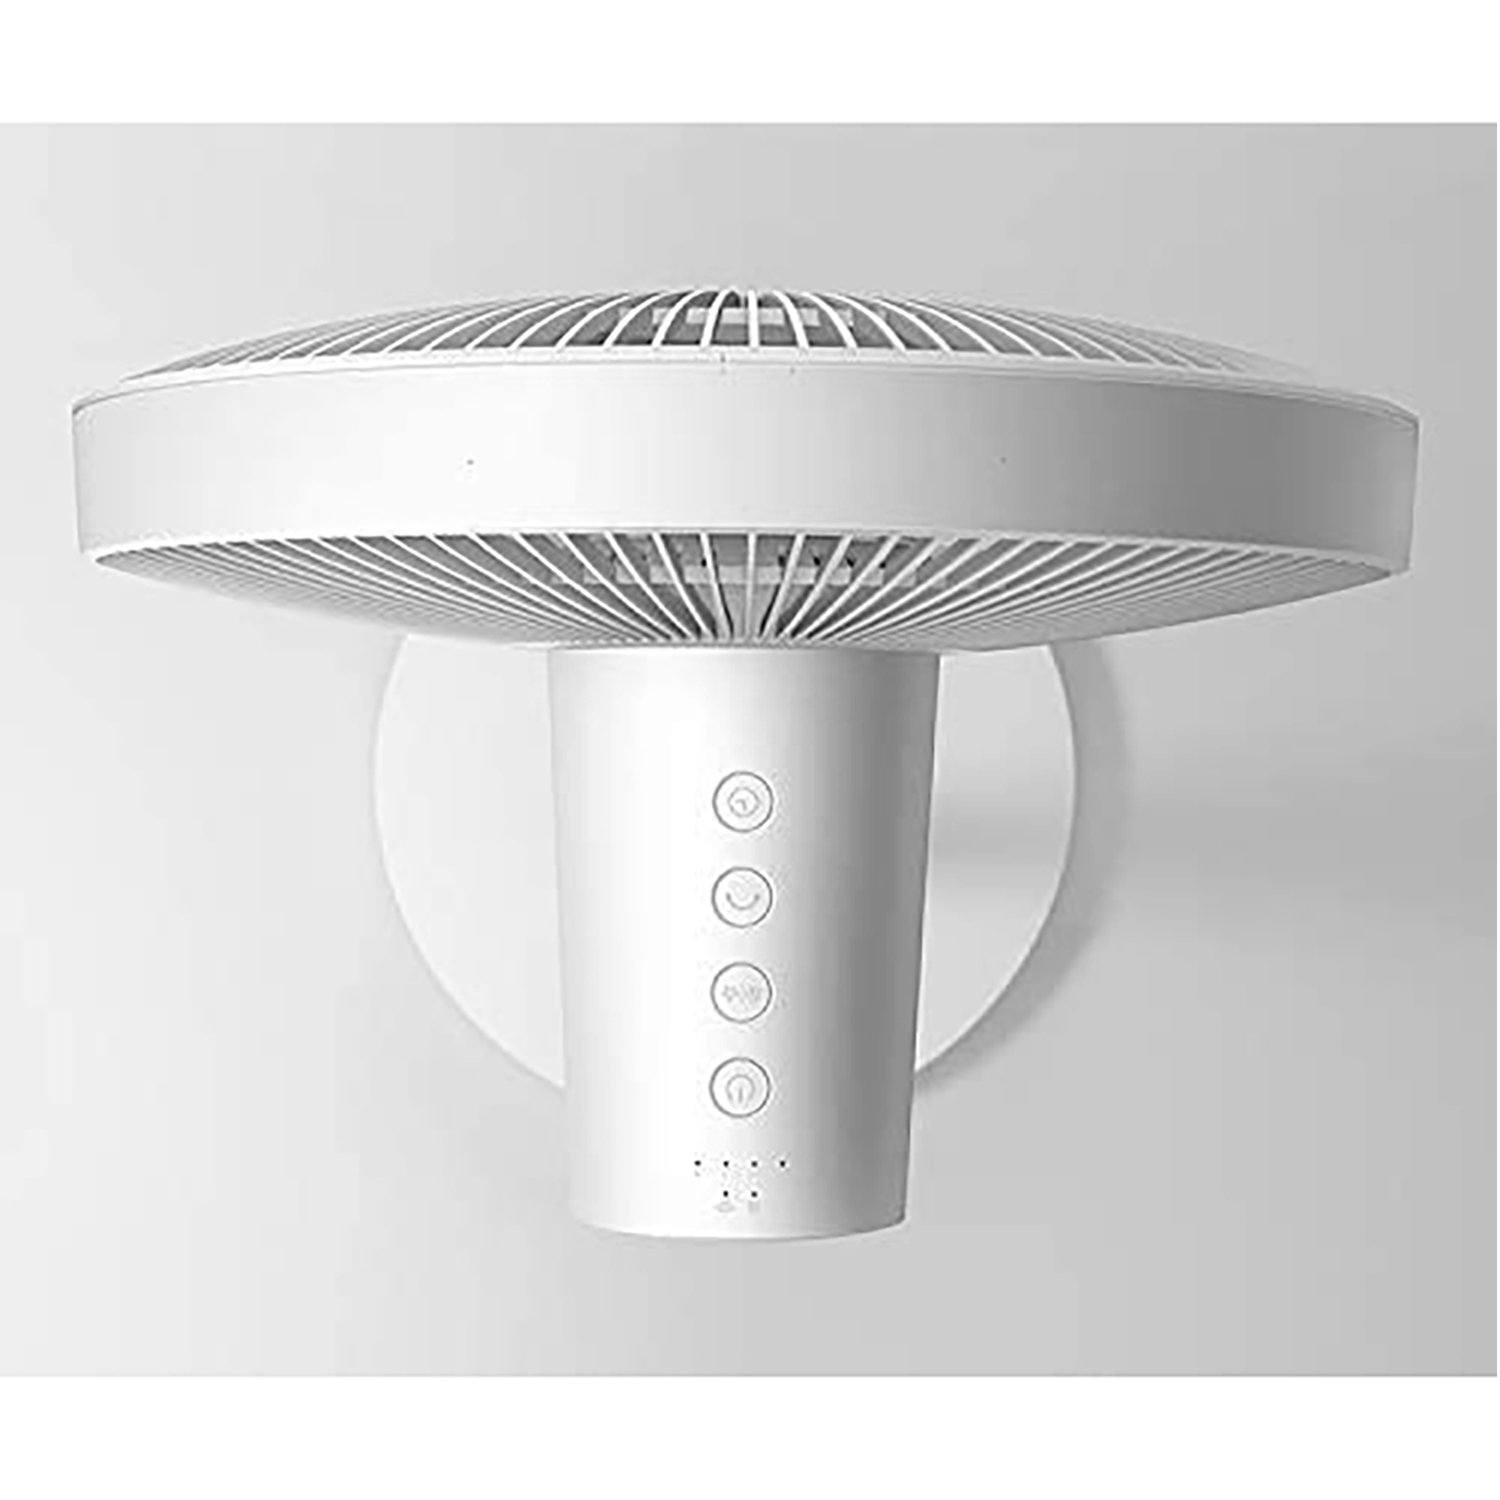 Xiaomi Mijia 1X Wired Portable Home Cooler House Standing Fan Natural Wind With WiFi APP Control, White Default Xiaomi 